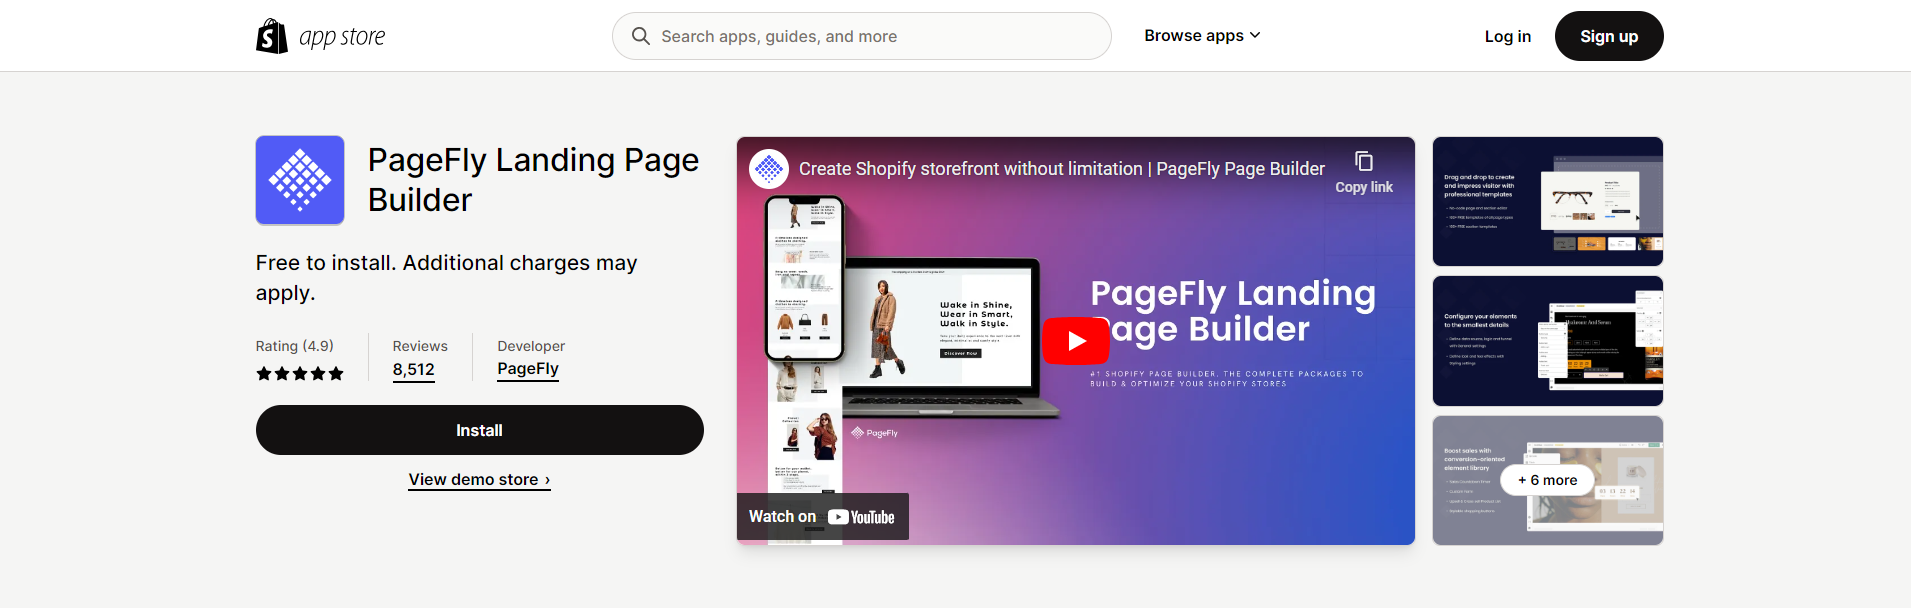 Pagefly landing page builder Shopify App